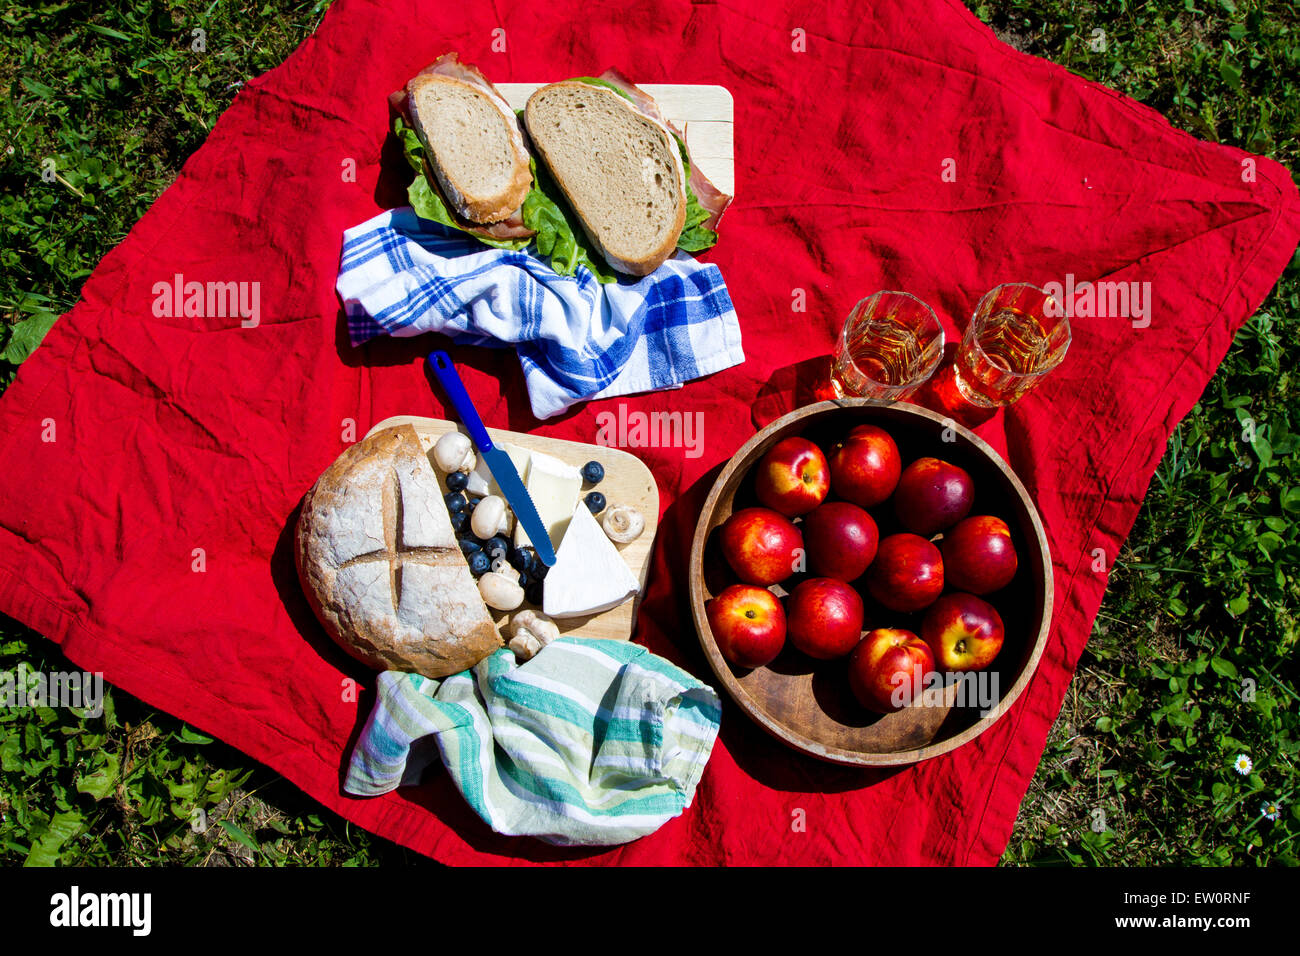 Picnic in the nature in a sunny day Stock Photo